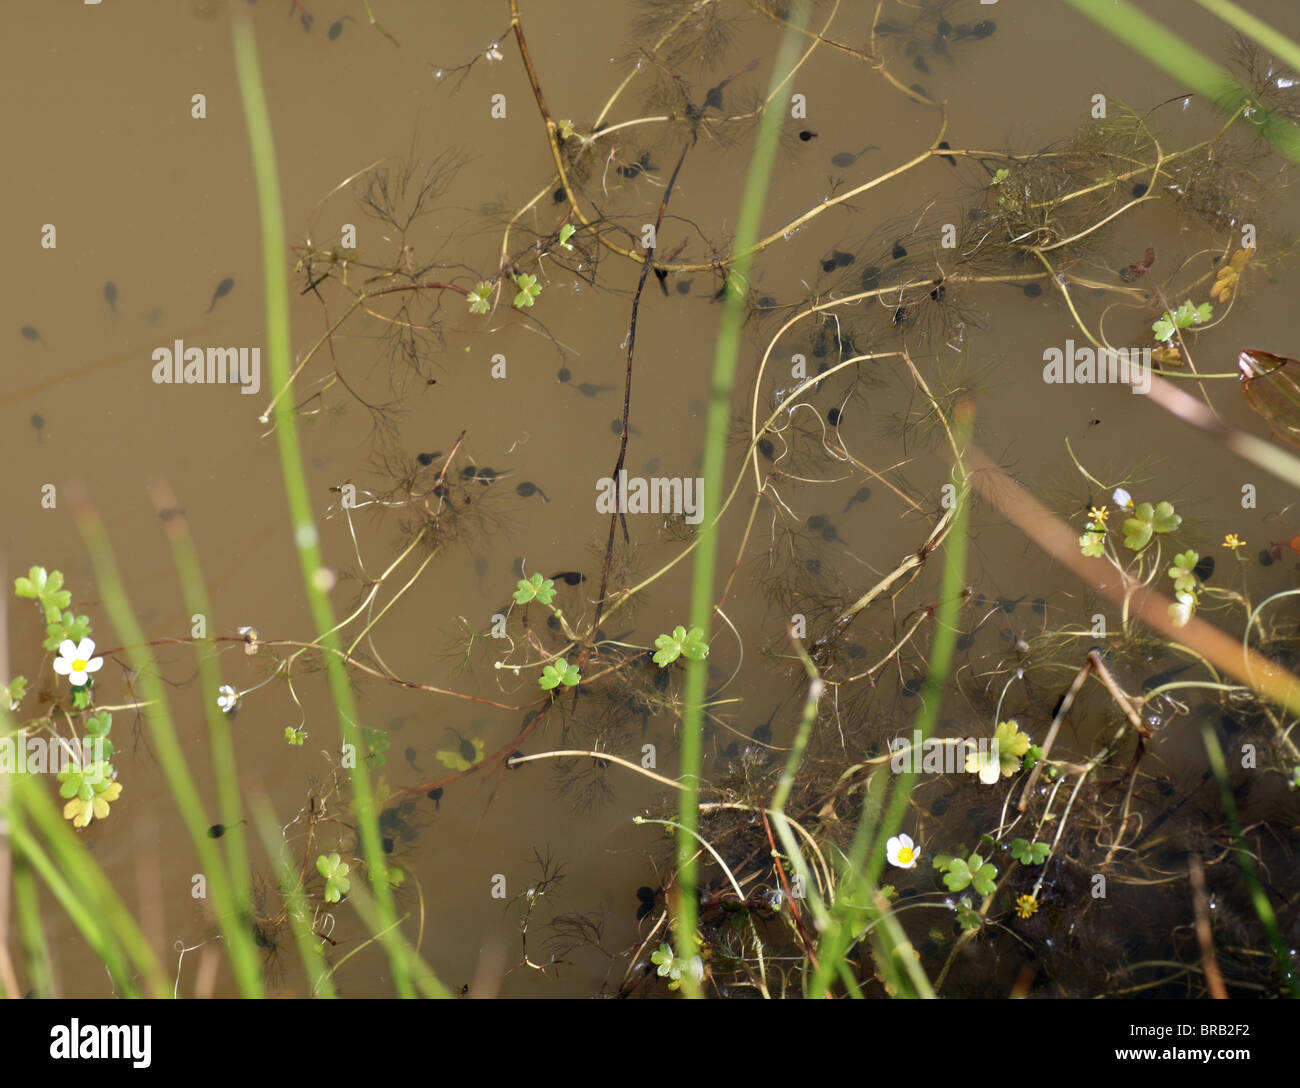 A pond with tadpoles, the wholly aquatic larval stage in the life cycle of an amphibian, particularly of a frog or toad. Stock Photo